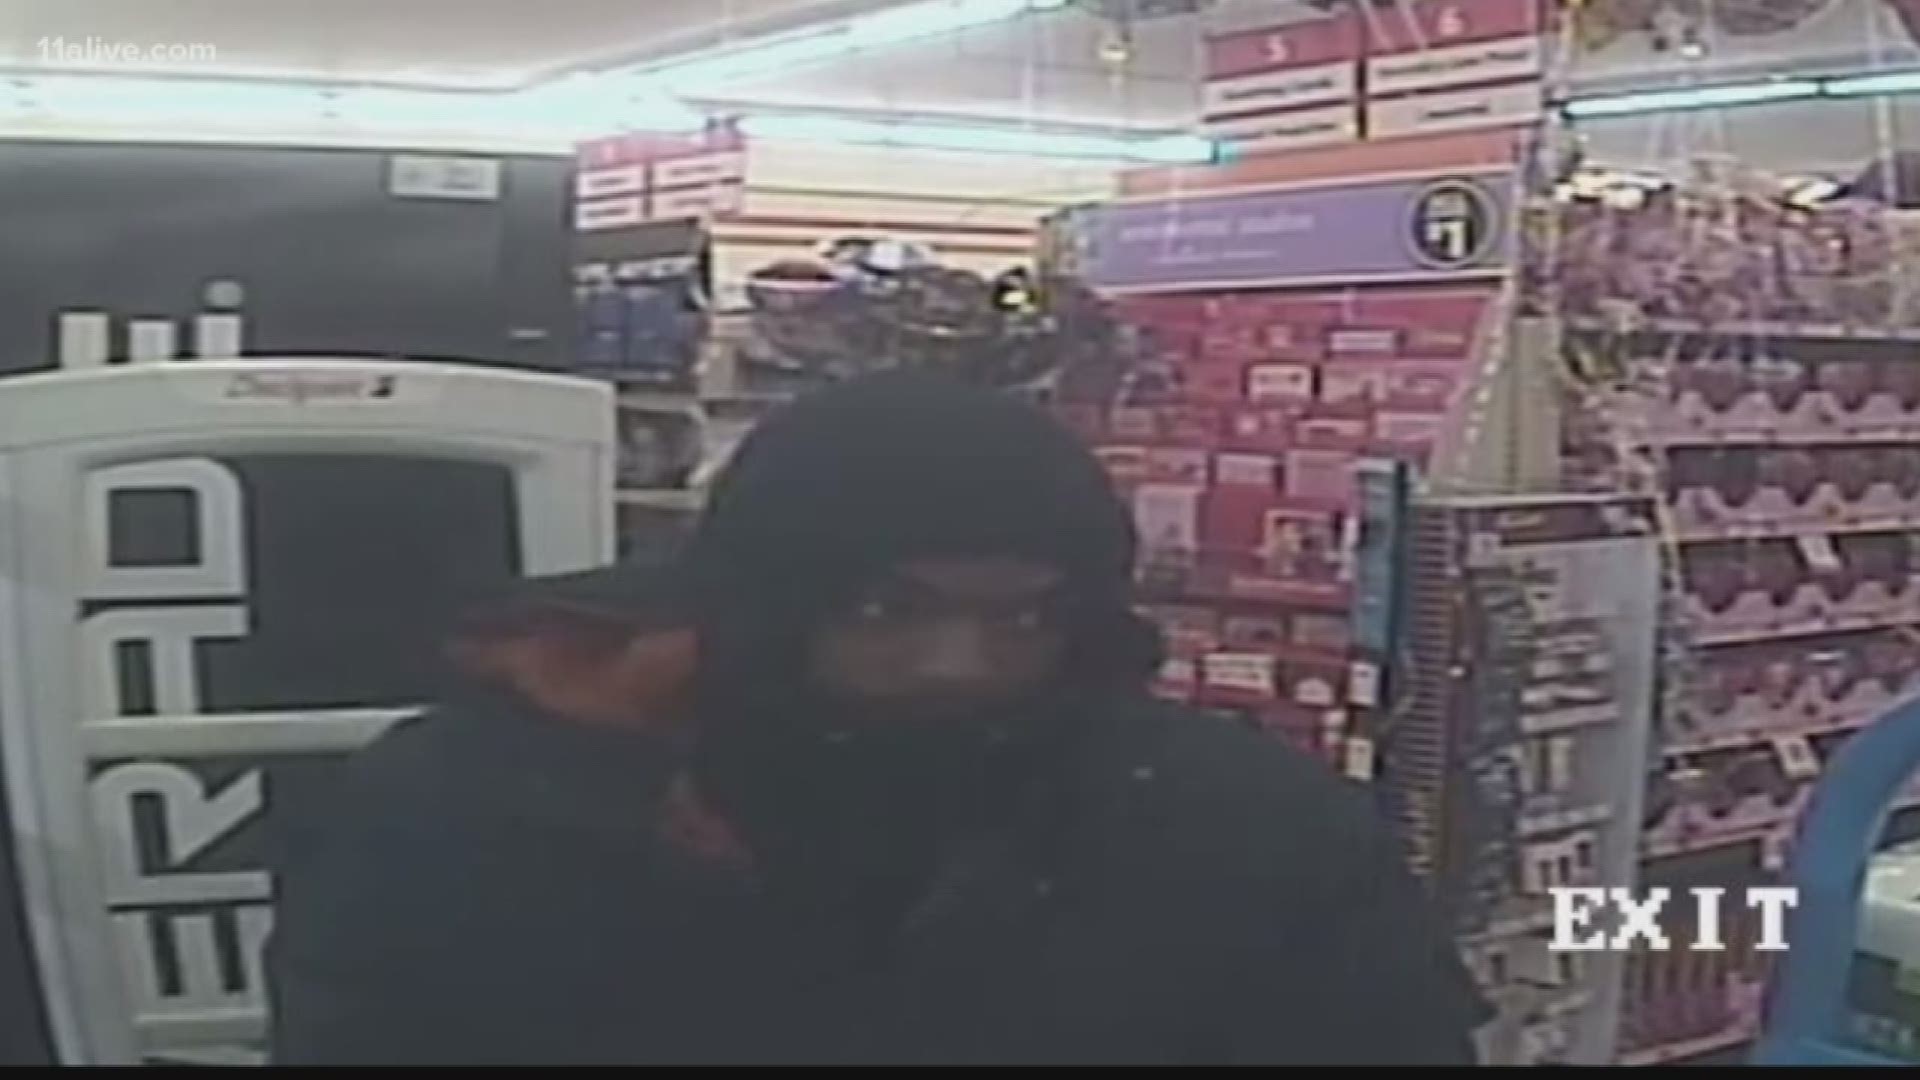 The FBI is now after an armed robber who they said has hit at least seven Family Dollar stores in the metro Atlanta area over the past month.